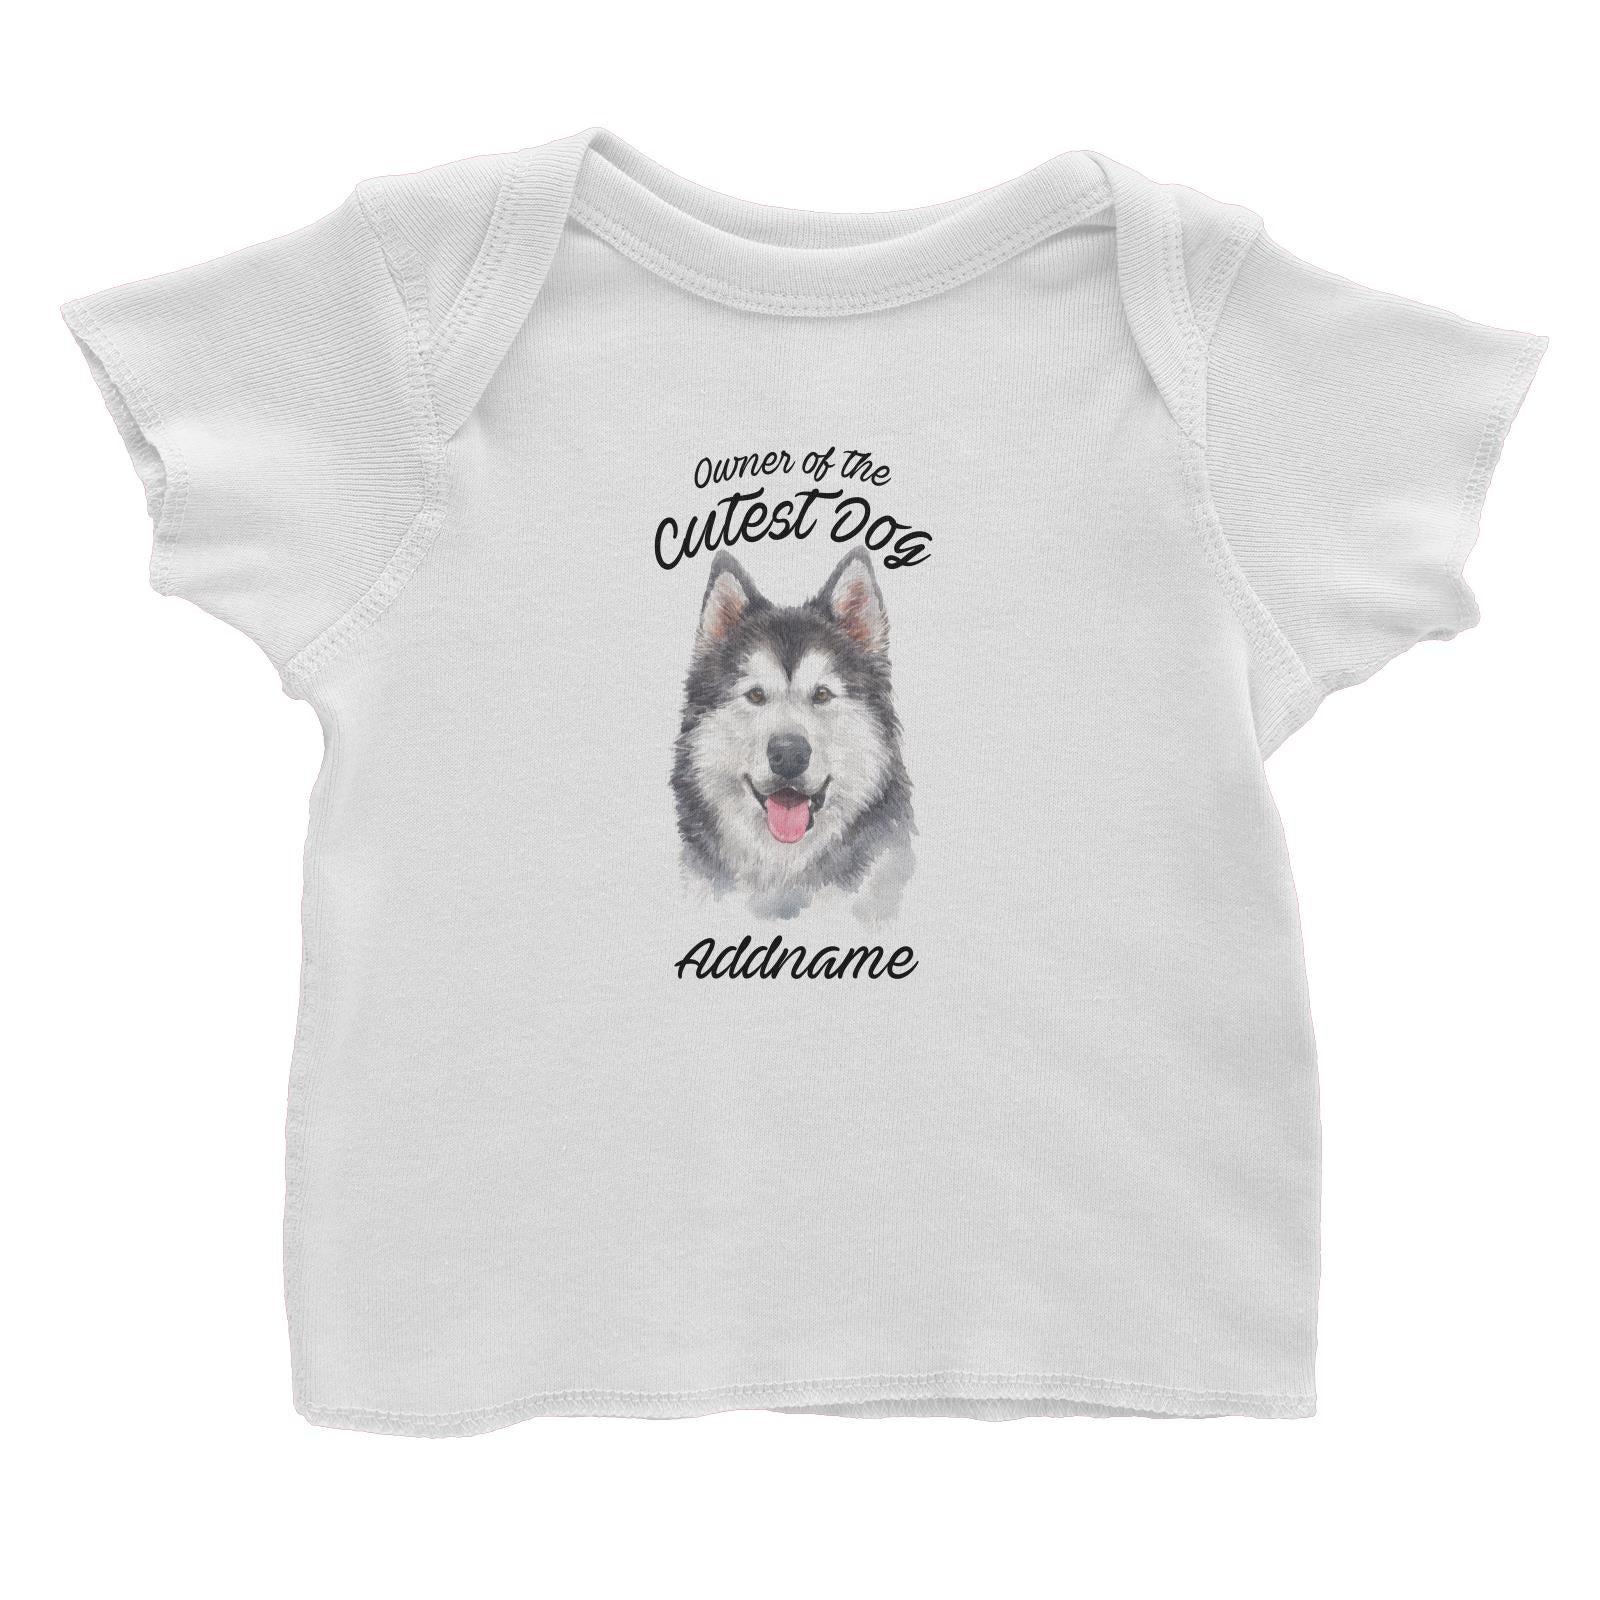 Watercolor Dog Owner Of The Cutest Dog Siberian Husky Smile Addname Baby T-Shirt